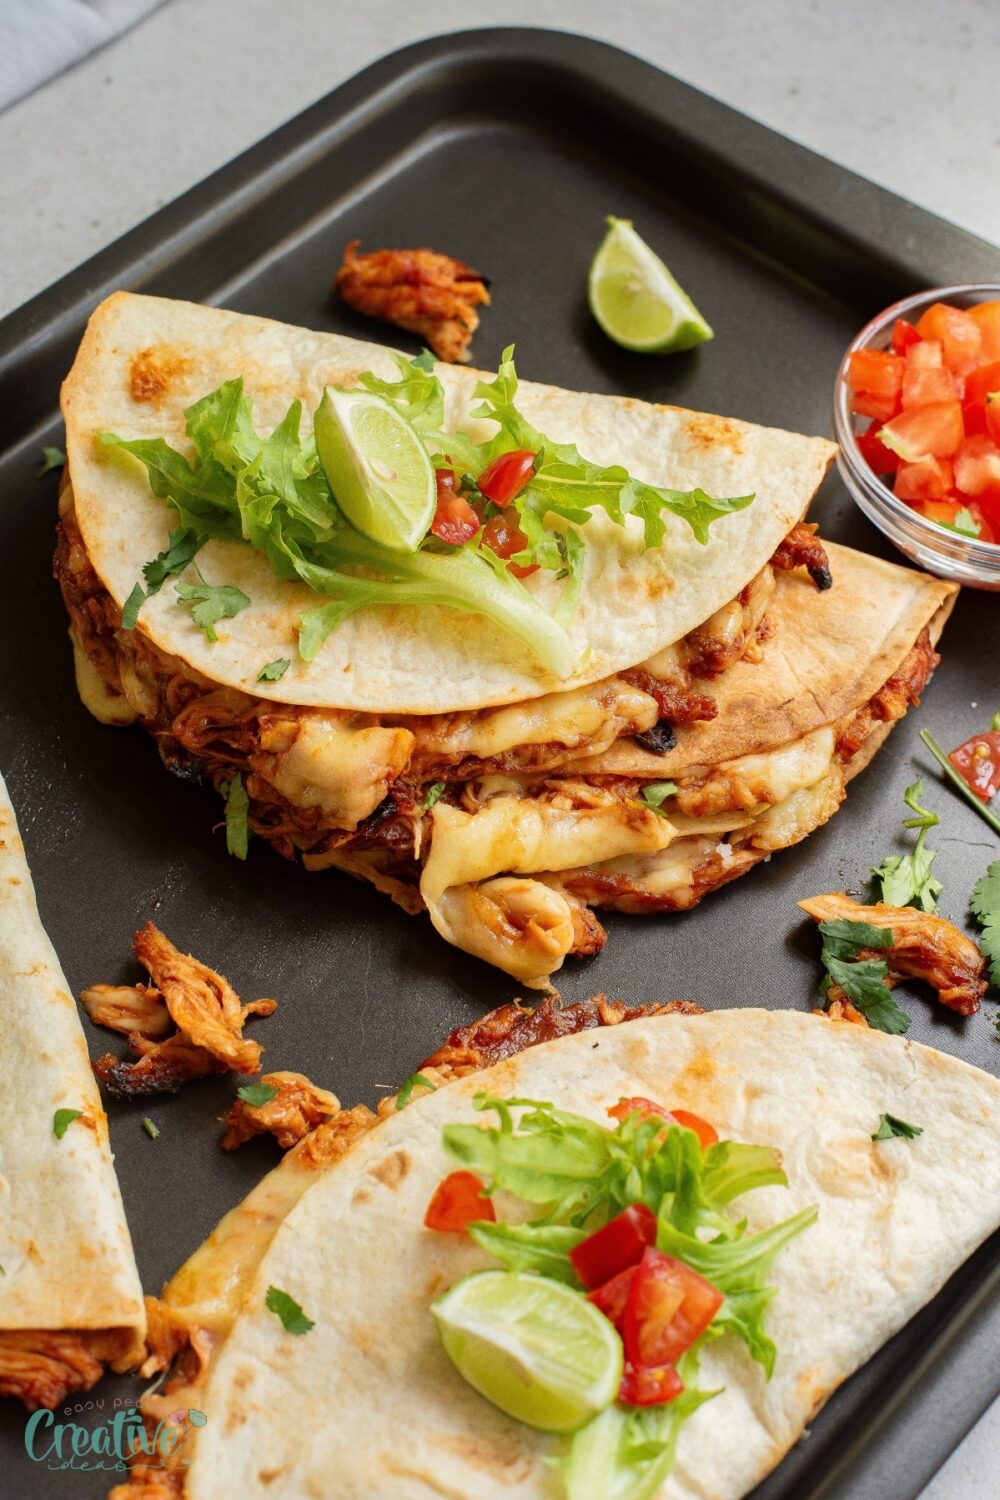 Tasty baked BBQ chicken tacos - a delectable alternative to regular tacos that will surely impress your guests!